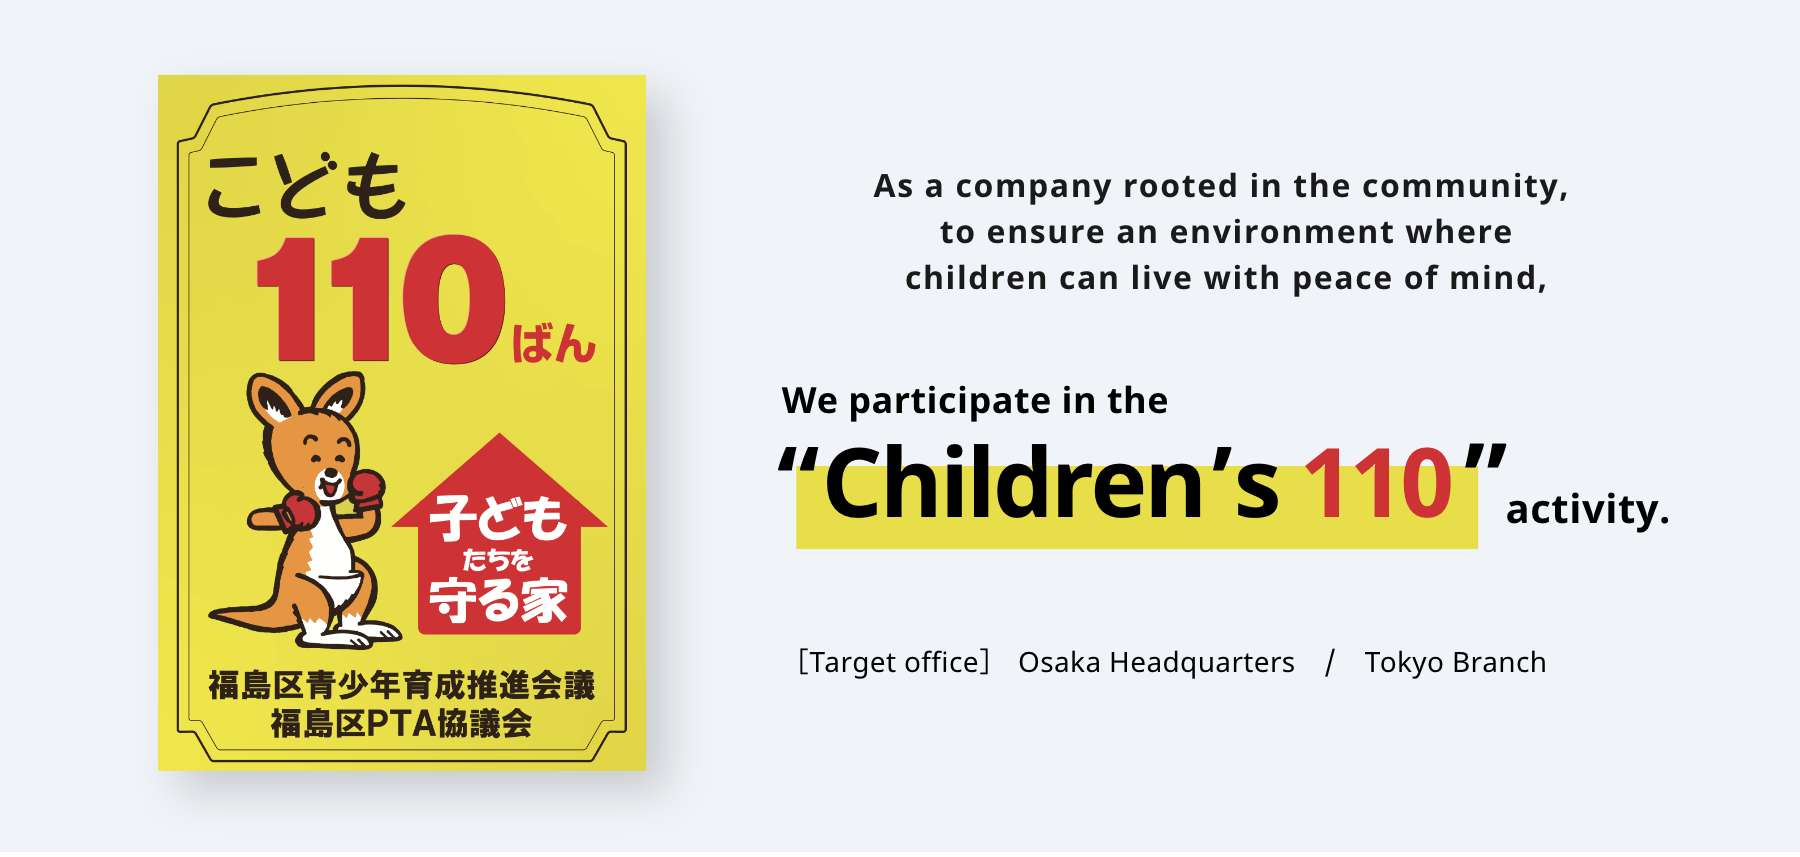 As a company rooted in the community, to ensure an environment where children can live with peace of mind, We participate in the “Children’s 110” activity. ［Target office］Osaka Headquarters　/　Tokyo Branch